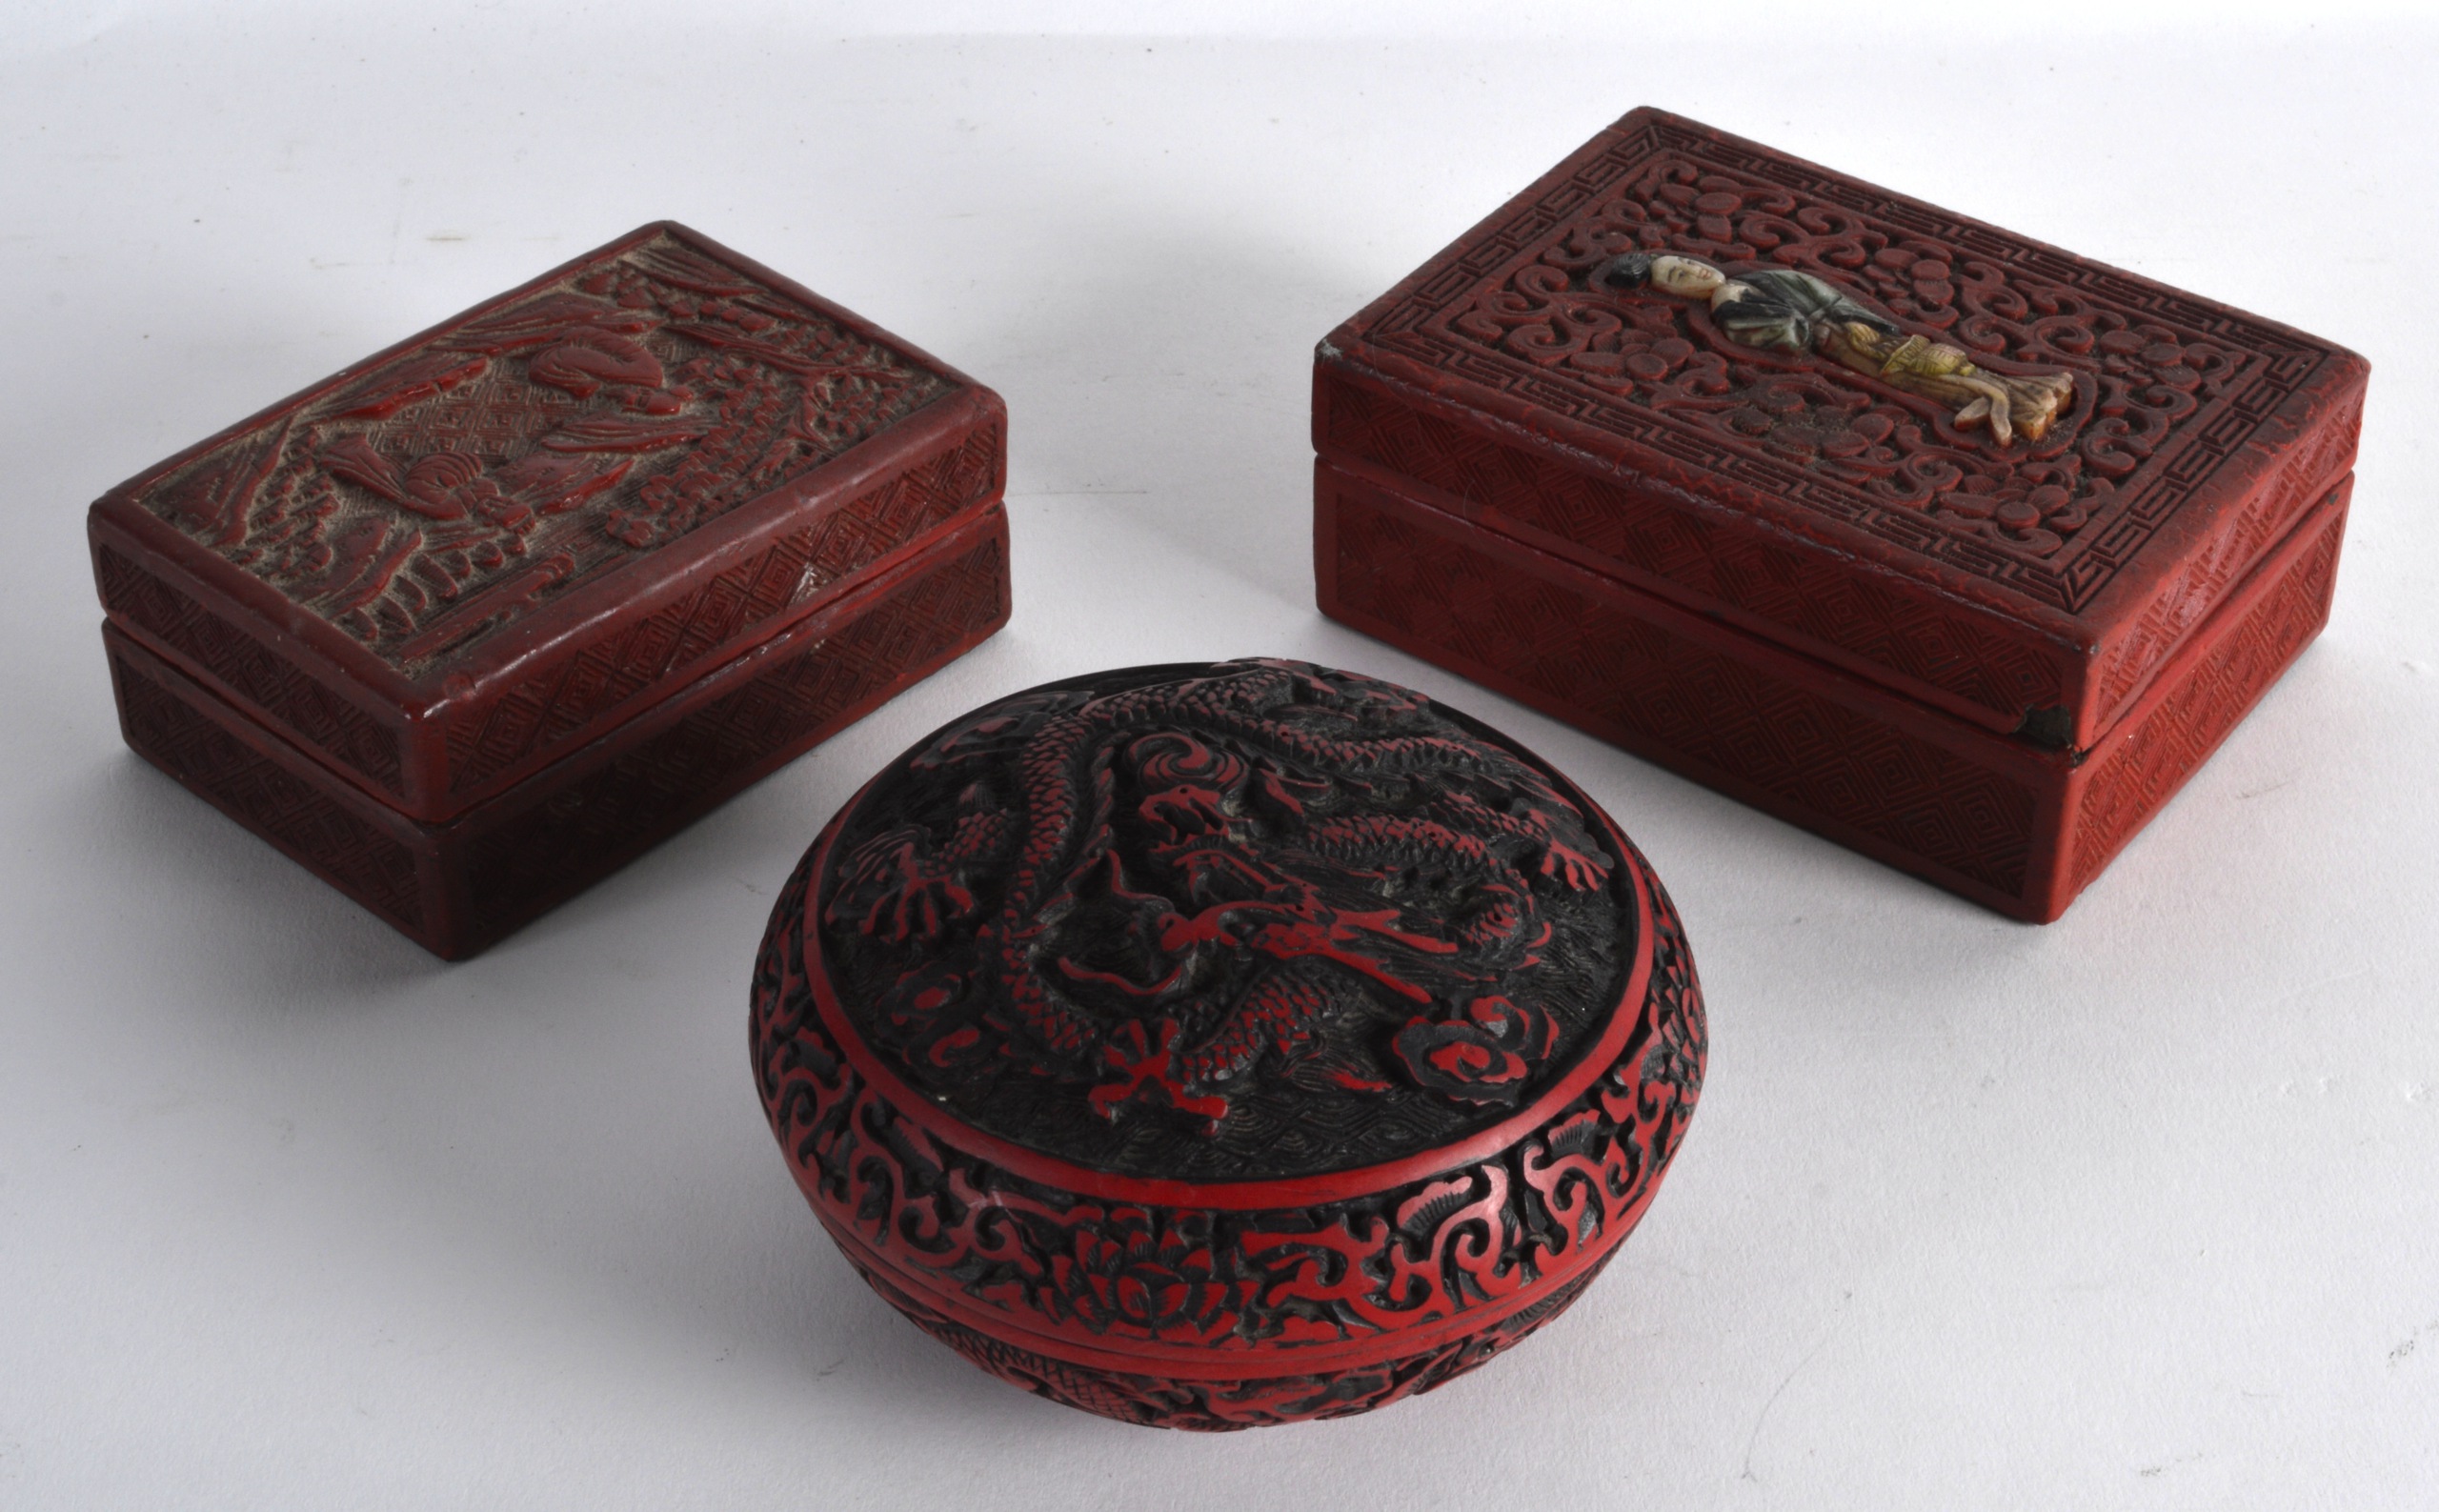 AN UNUSUAL EARLY 20TH CENTURY CHINESE CINNABAR LACQUER AND HARDSTONE BOX together with another